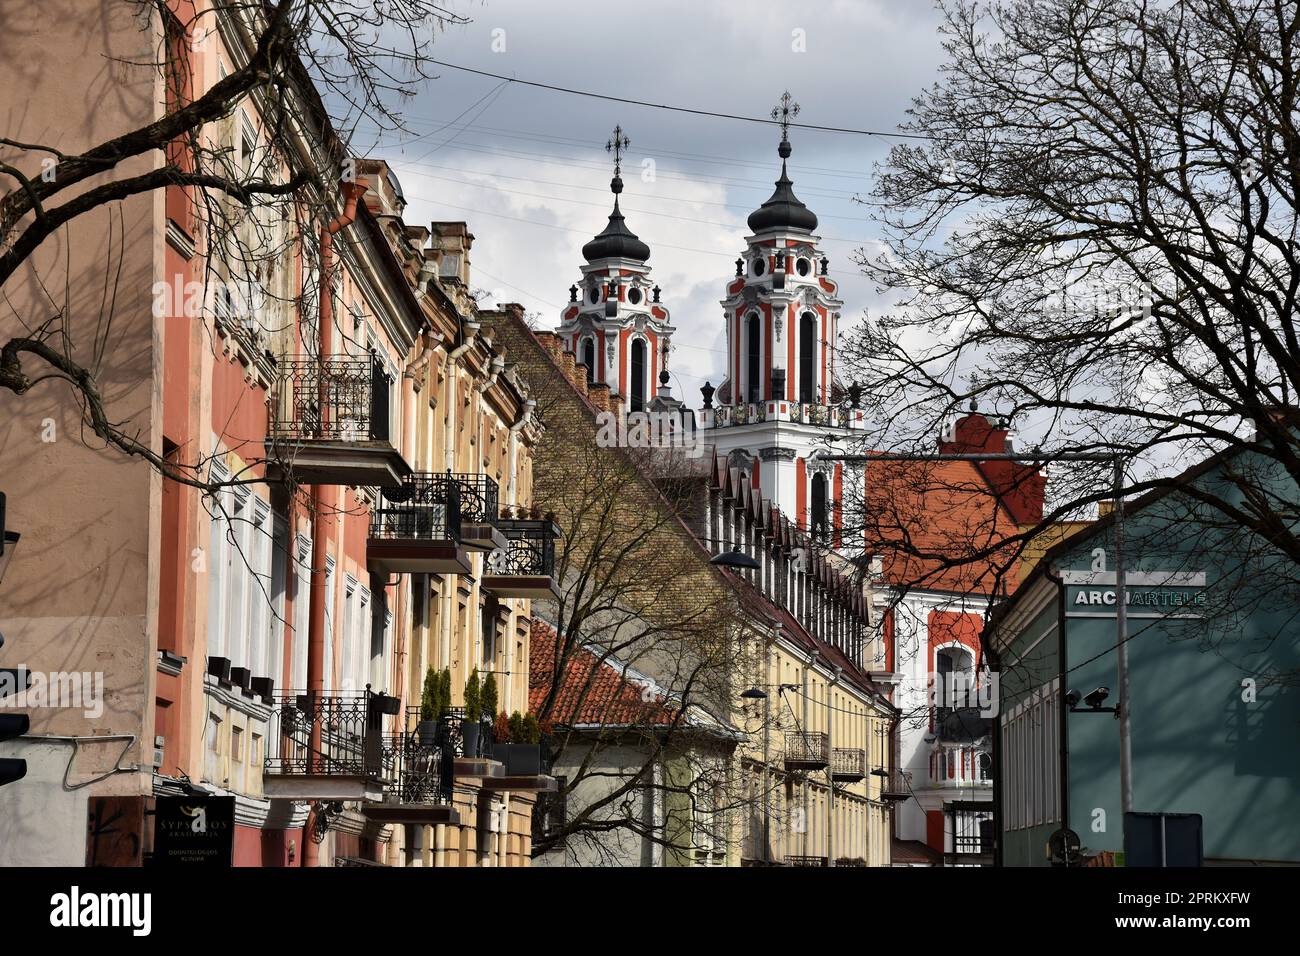 Vilnius, capital of Lithuania: old street with baroque church Stock Photo